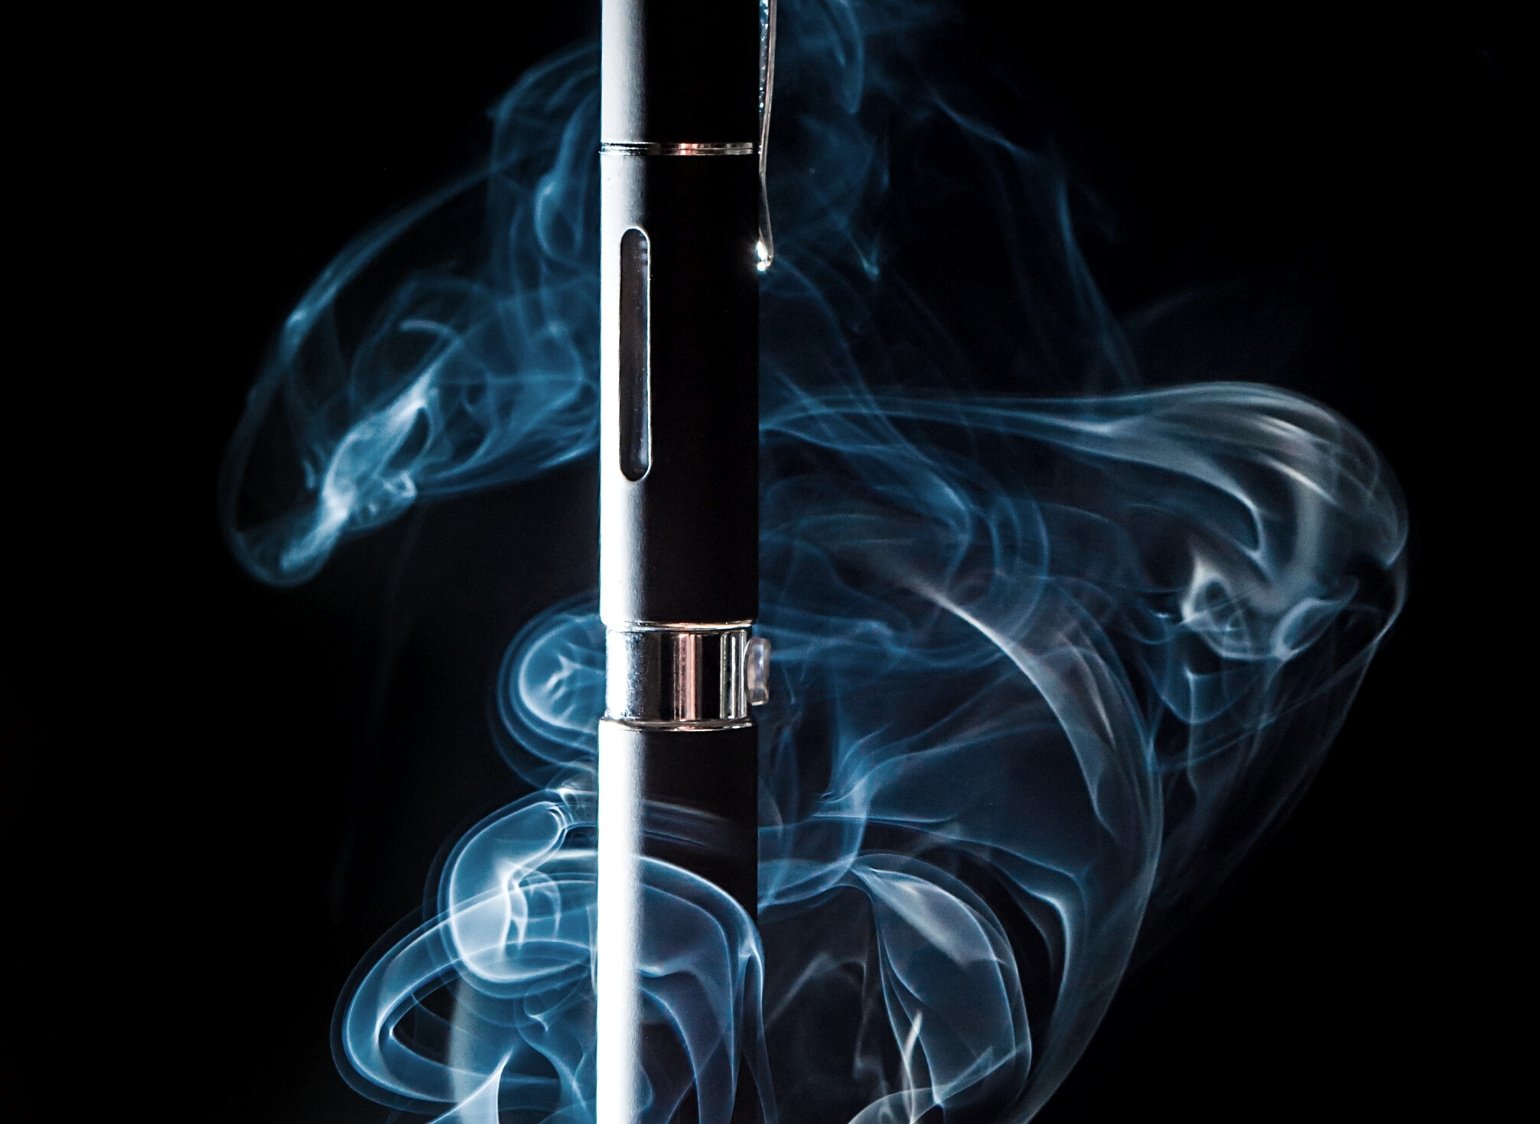 Unlock the full potential of your extract-specific vaporizer with our comprehensive guide. Learn how to use your device to its fullest extent, whether you're vaping oils, wax, or shatter.